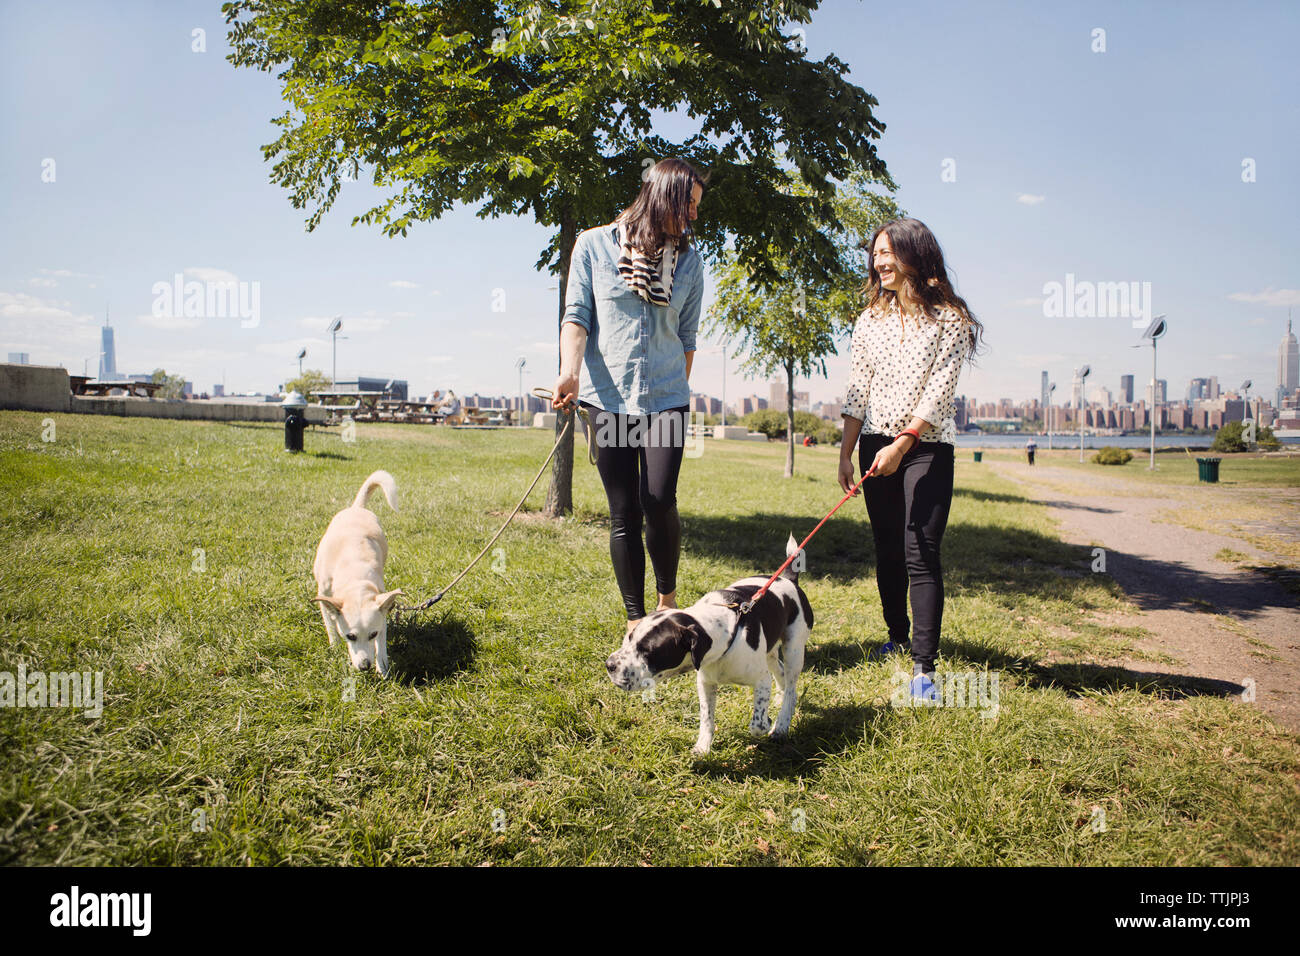 Happy women walking with dogs on grassy field at park Stock Photo